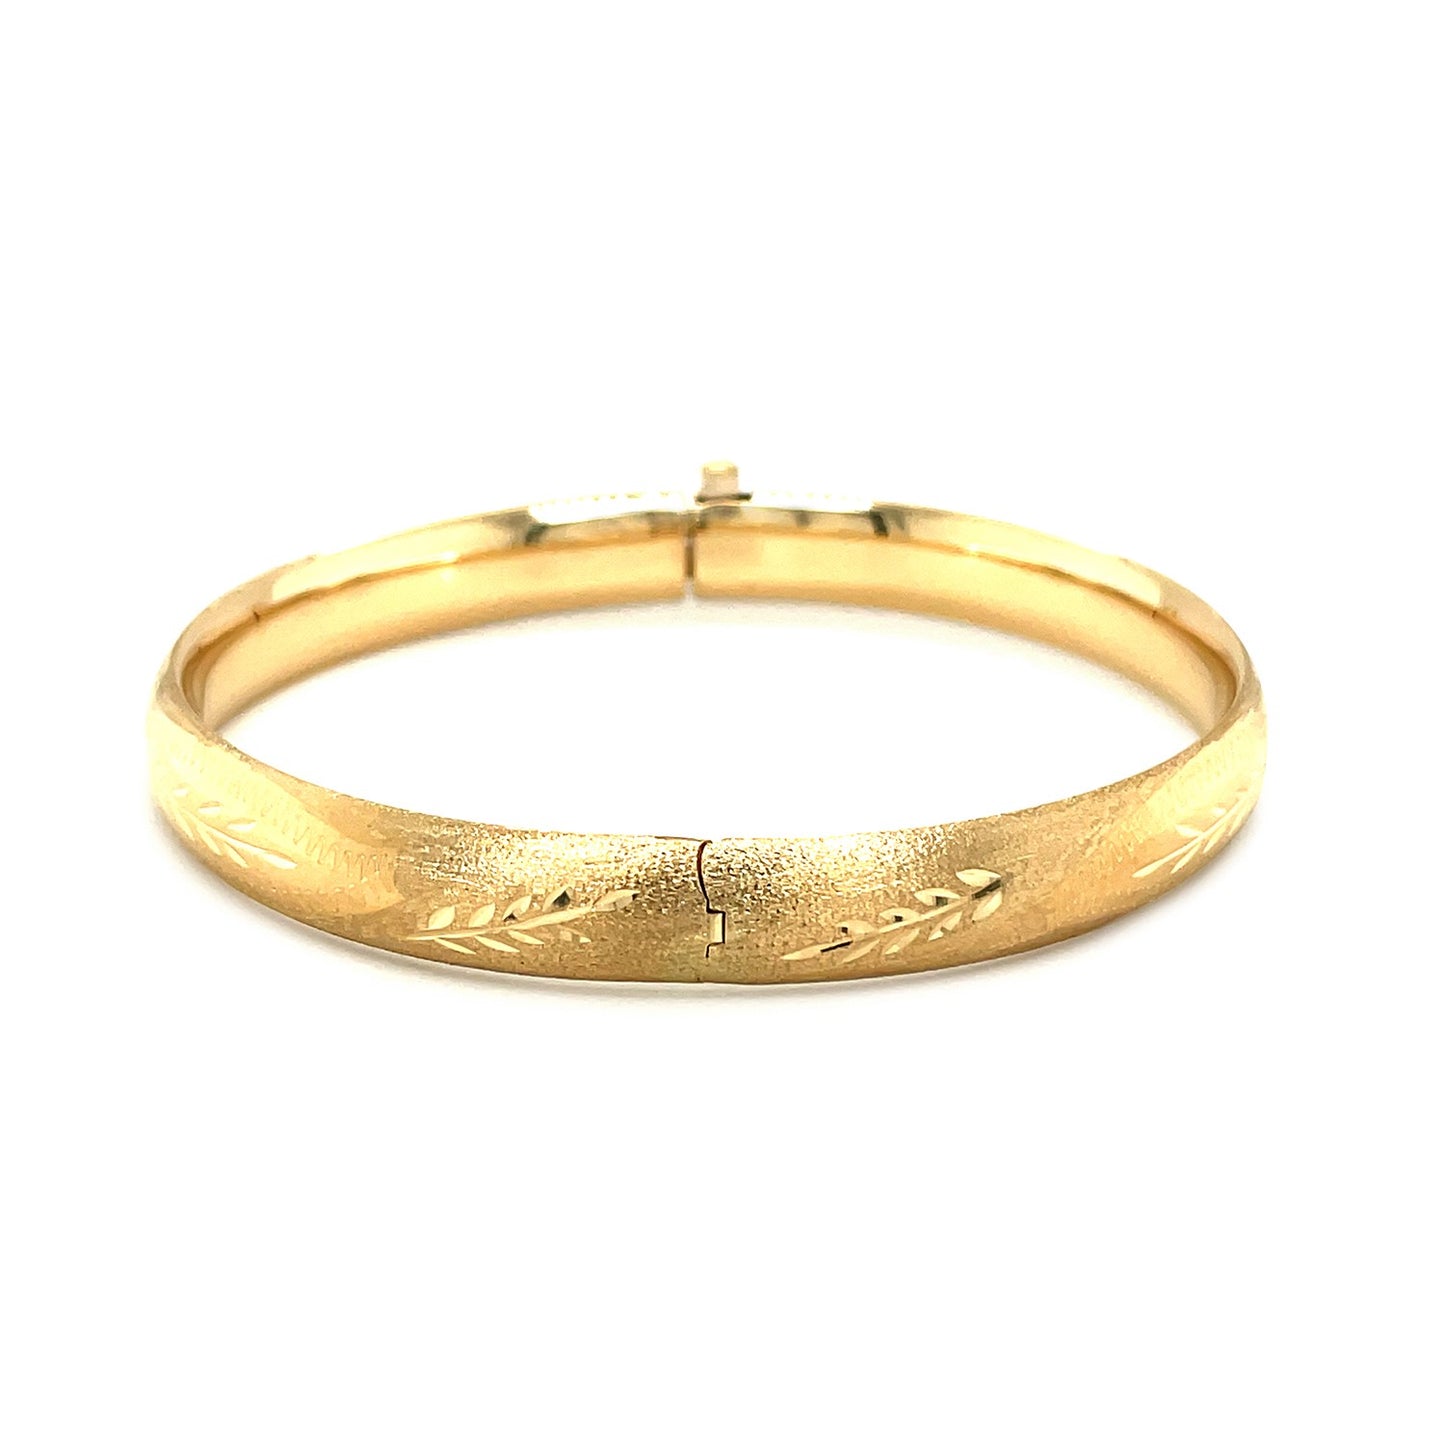 Classic Floral Carved Bangle in 14k Yellow Gold (8.0mm)